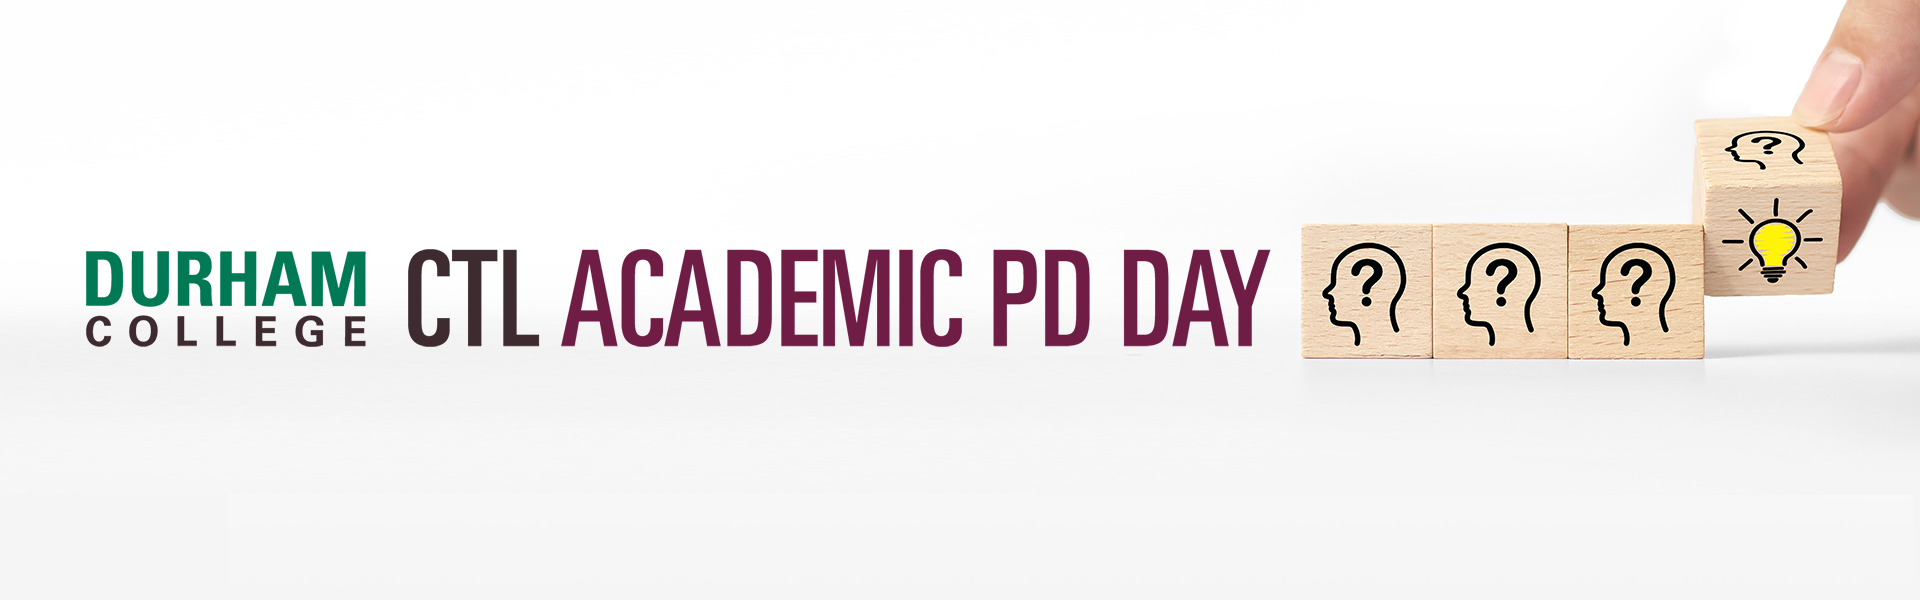 Durham College CTL Academic PD Day